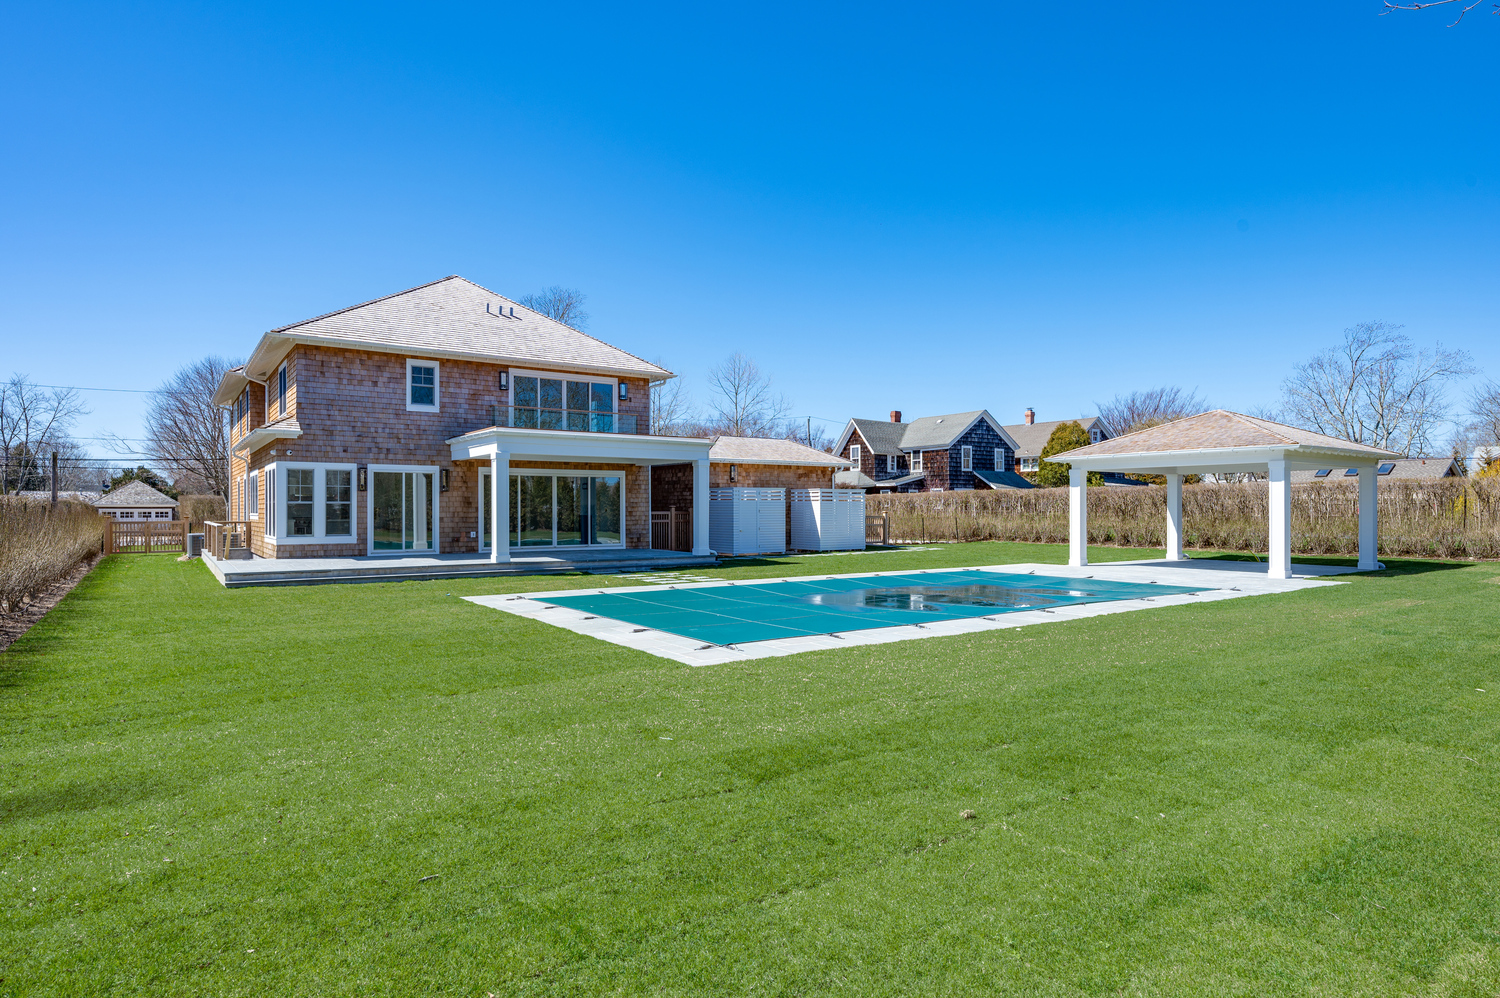  In Southampton Village, 162 Wooley Street sold for $6.4 million. BRIAN BAILEY/MEDIAHAMPTONS FOR THE CORCORAN GROUP  